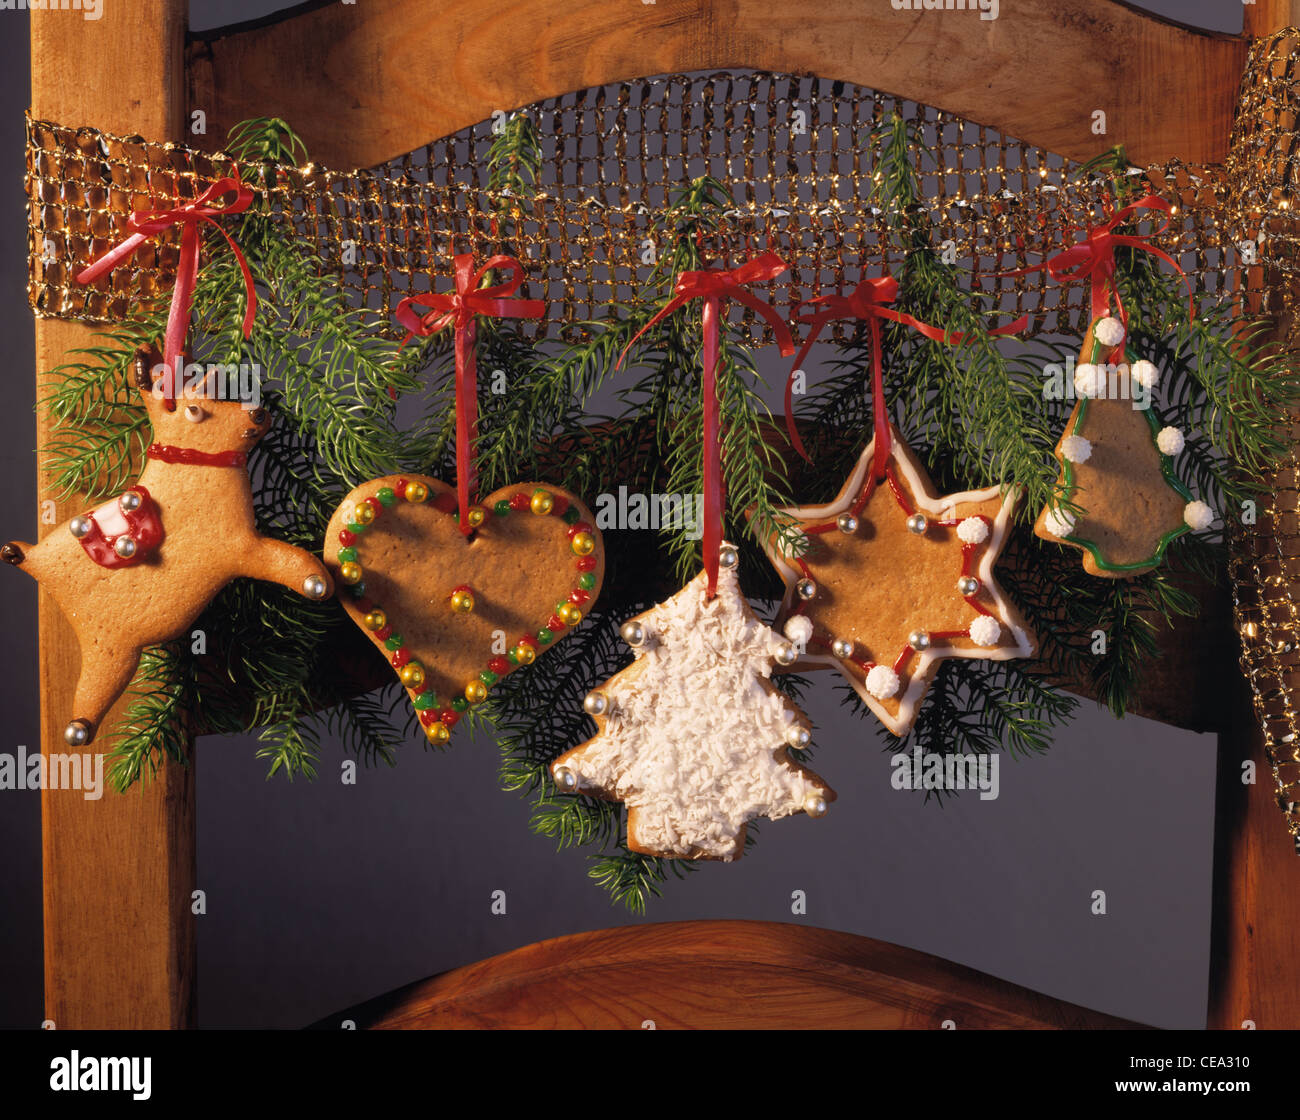 Gingerbread - ornaments Stock Photo